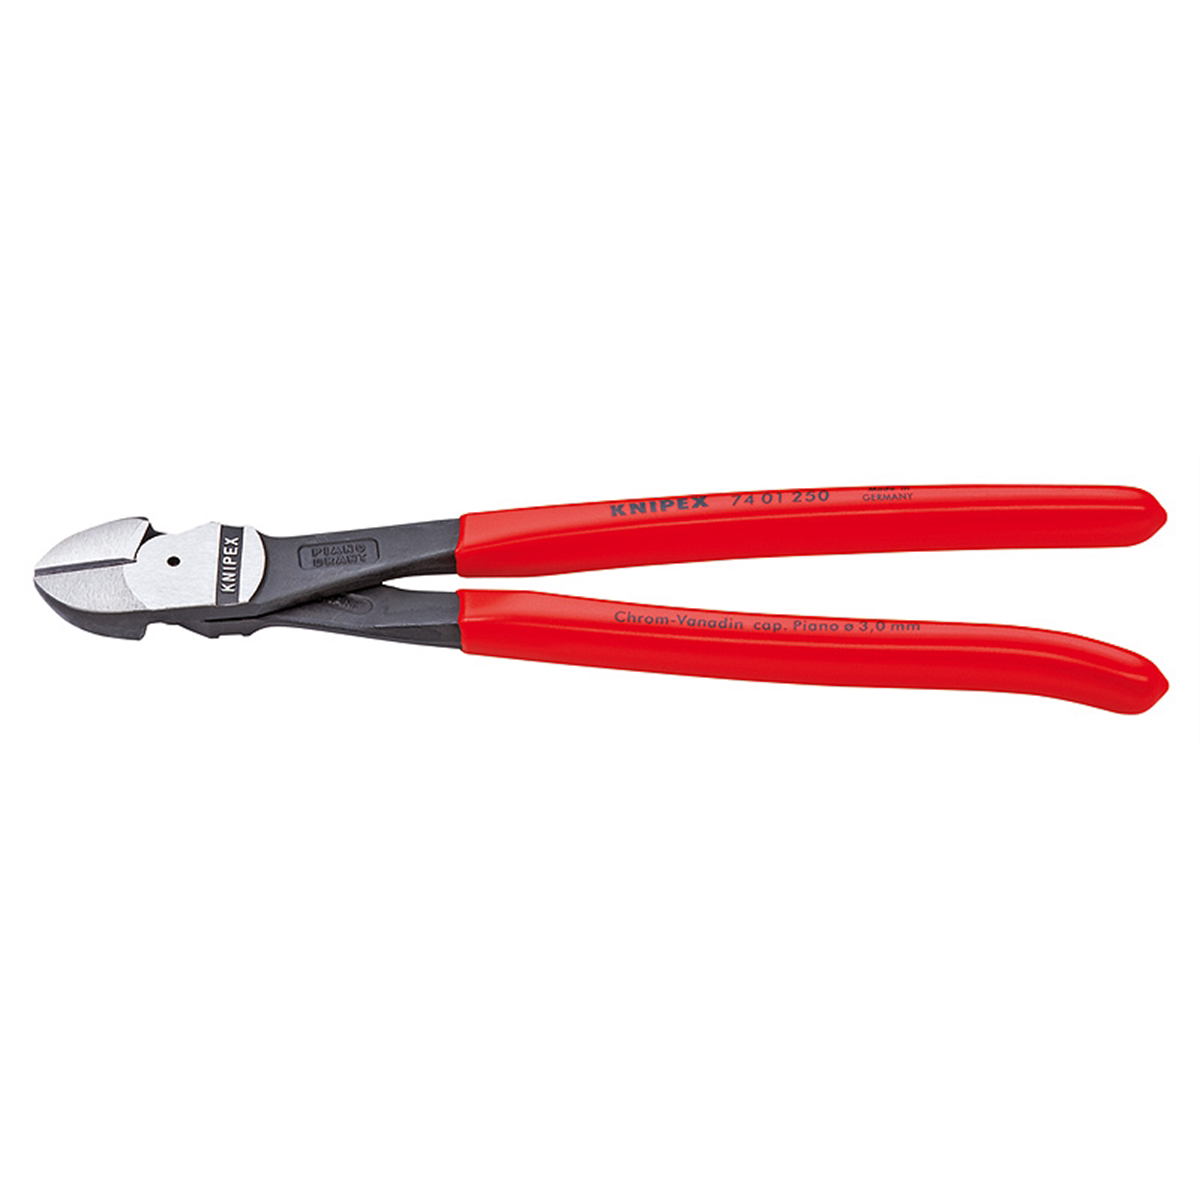 KNIPEX Tools 74 01 250, 10-Inch High Leverage Diagonal Cutters - image 1 of 2